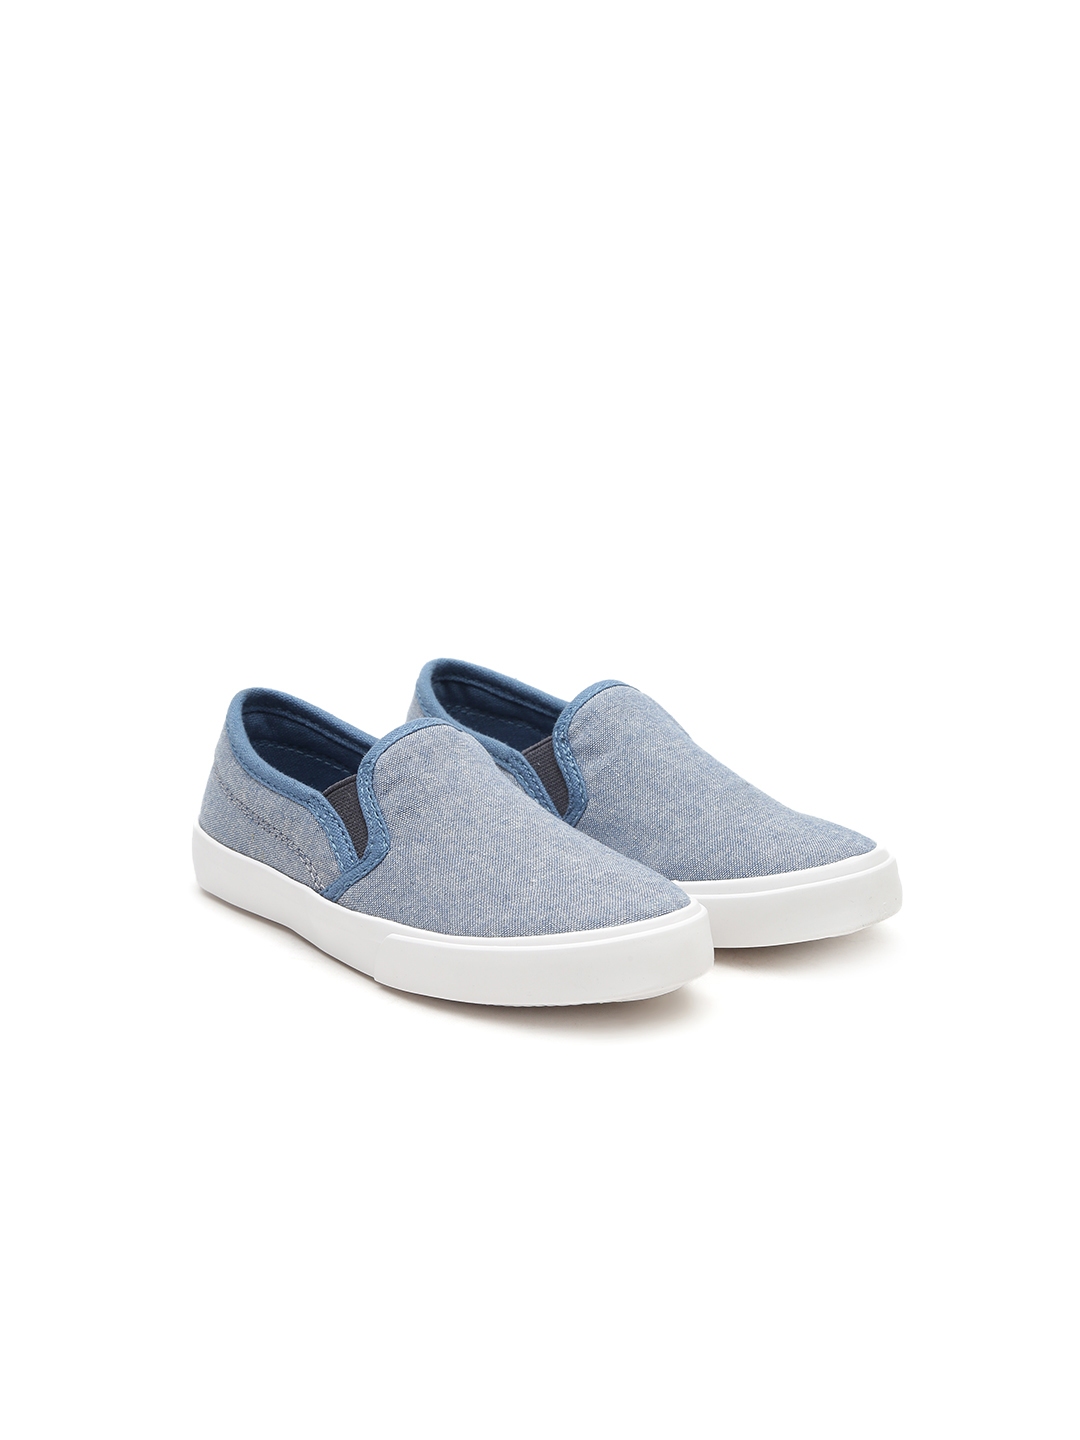 Buy United Colors Of Benetton Boys Blue Slip On Sneakers - Casual Shoes ...